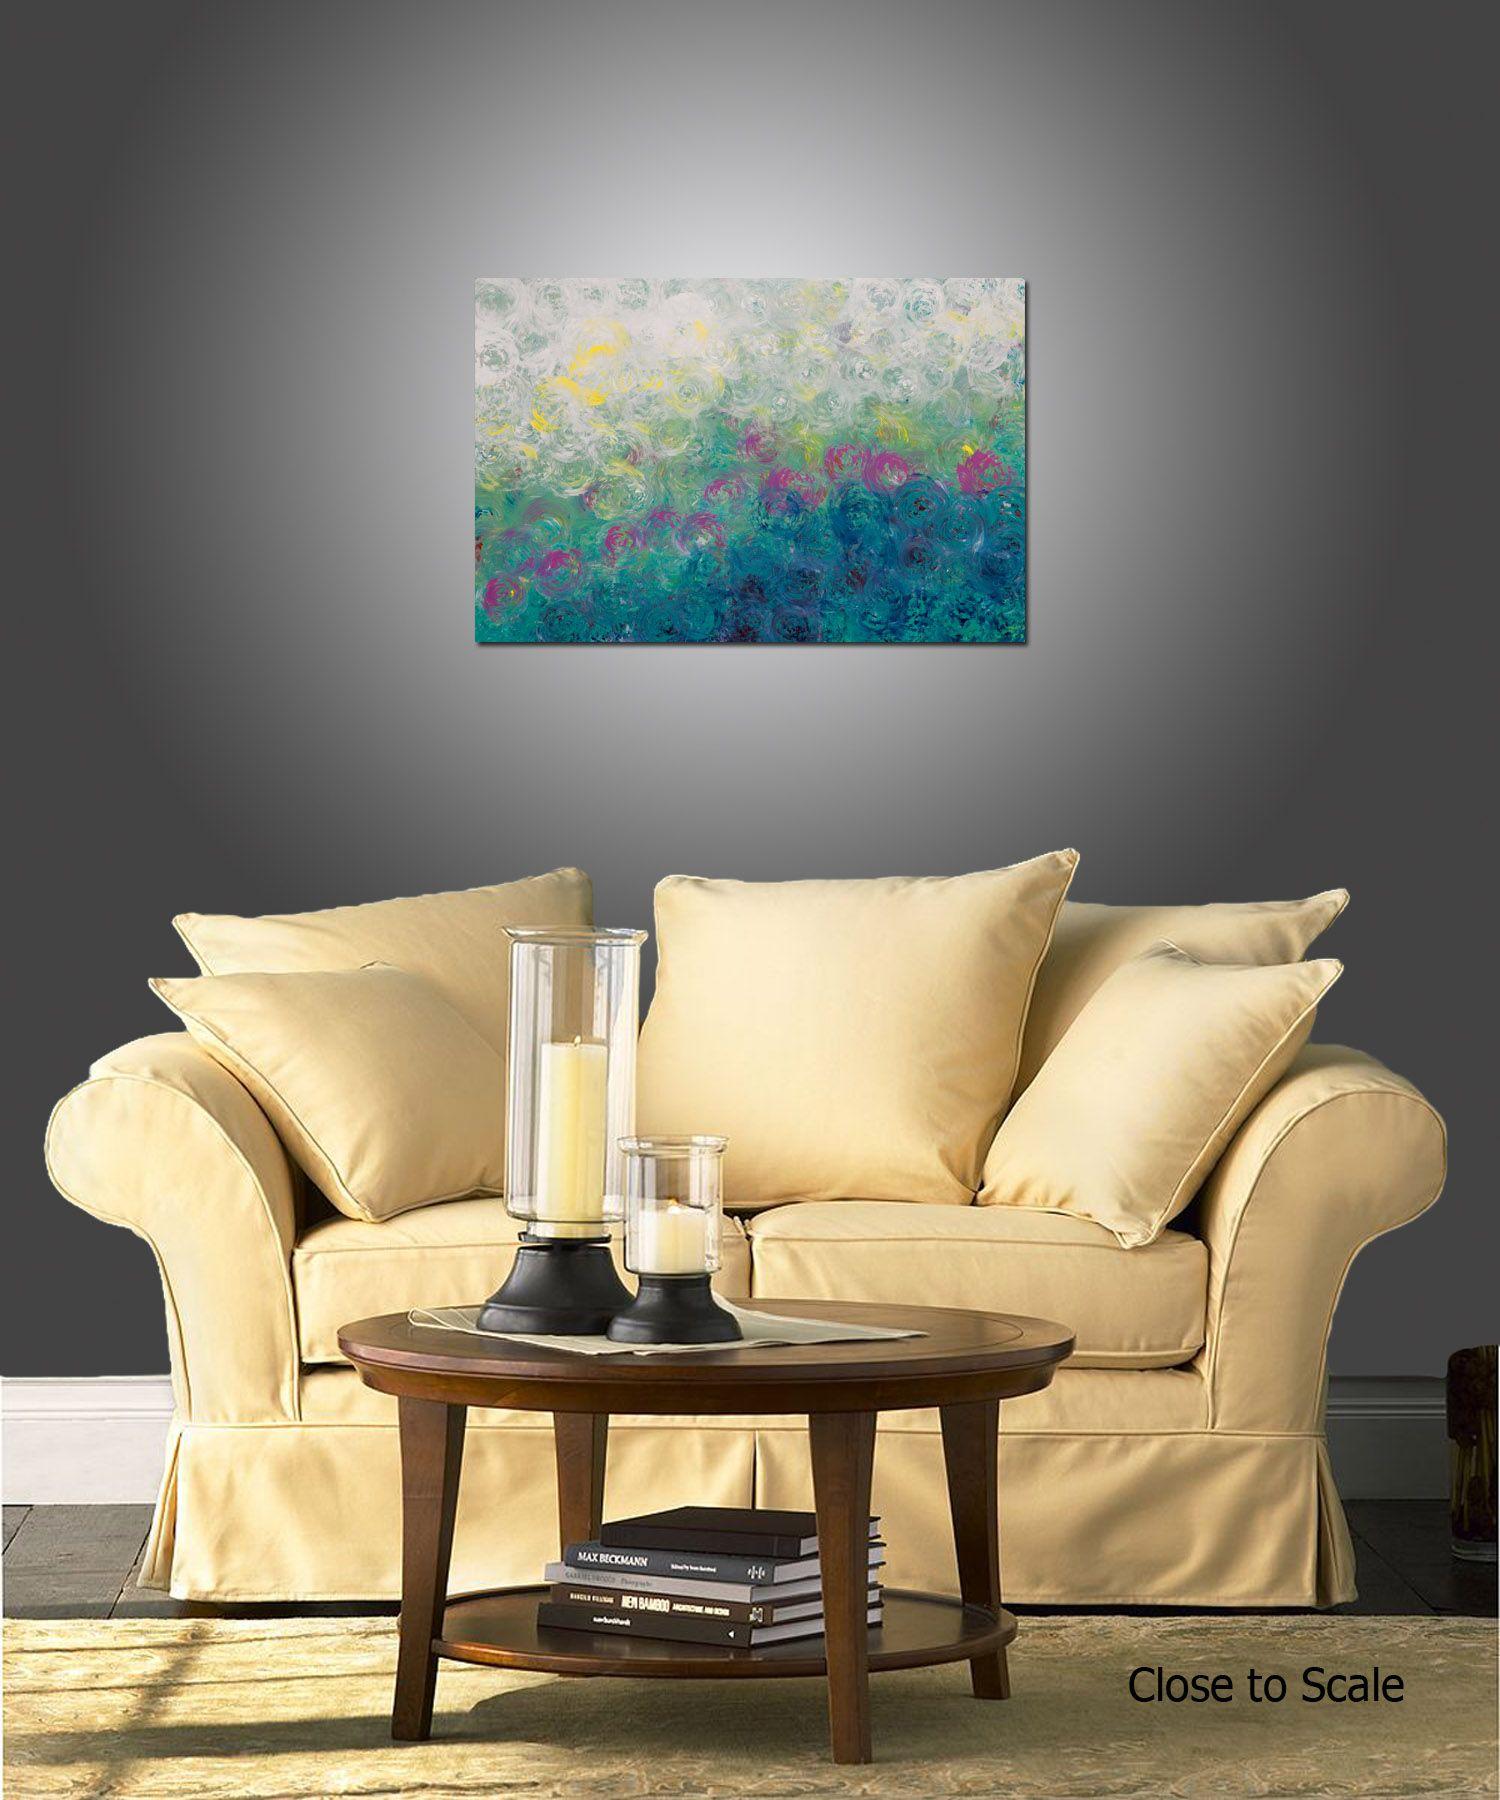 Synchronicity 11 is an original painting, created with acrylic paint on gallery-wrapped canvas. It has a width of 36 inches and a height of 24 inches with a depth of 1.5 inches (36x24x1.5).    The colors used in the painting are white, teal,